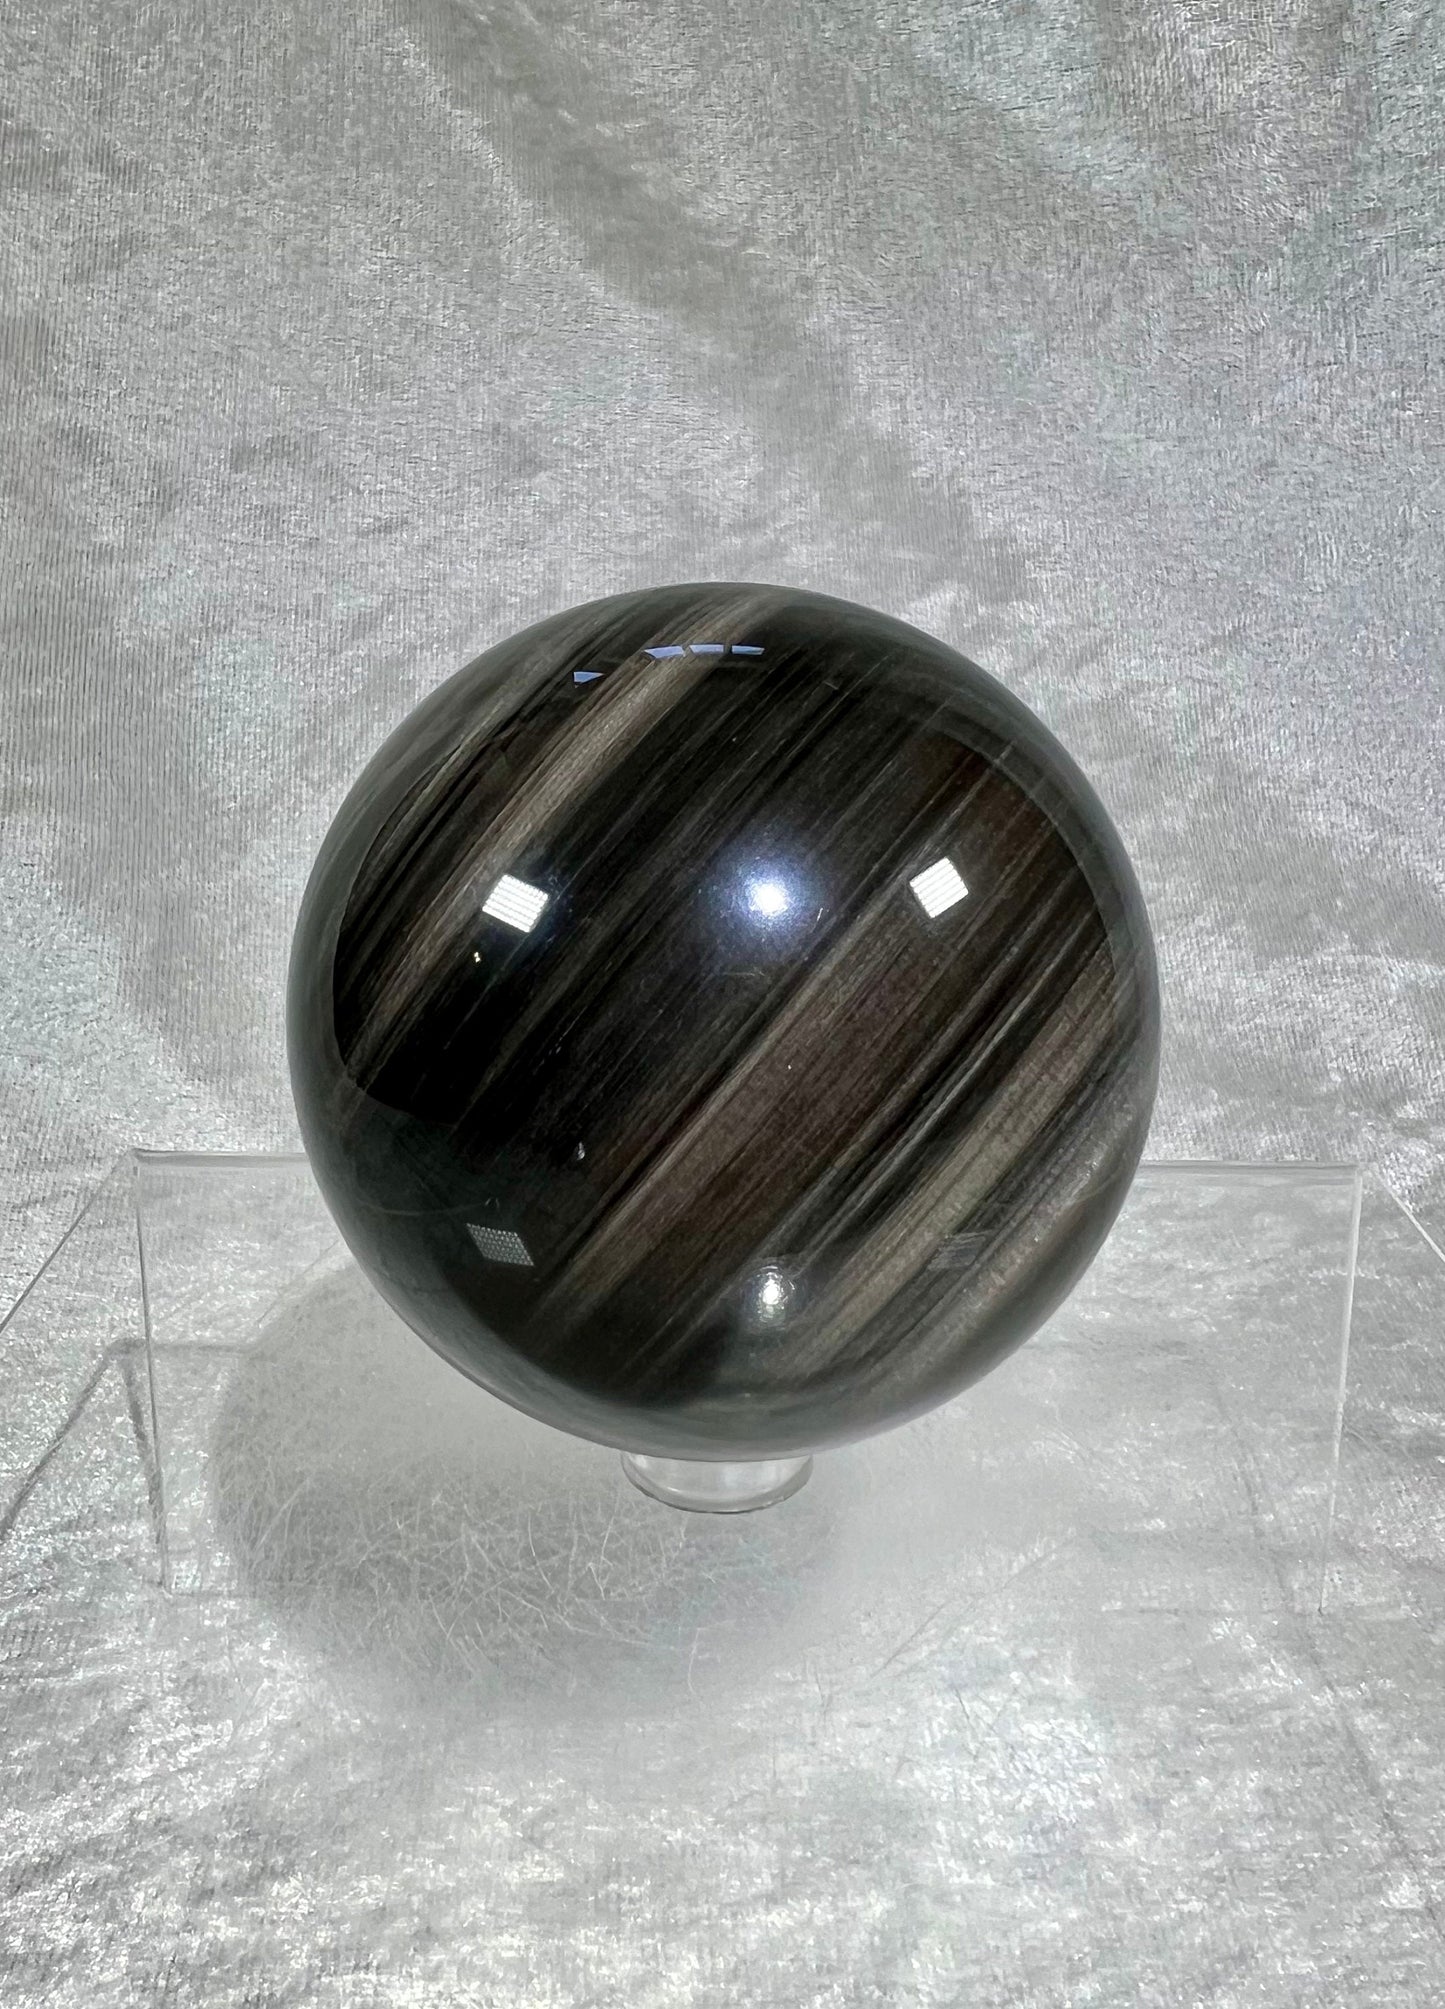 Gorgeous Silver Obsidian Sphere. 69mm. Stunning Silver Sheen Obsidian. Rare And Beautiful Crystal Sphere.